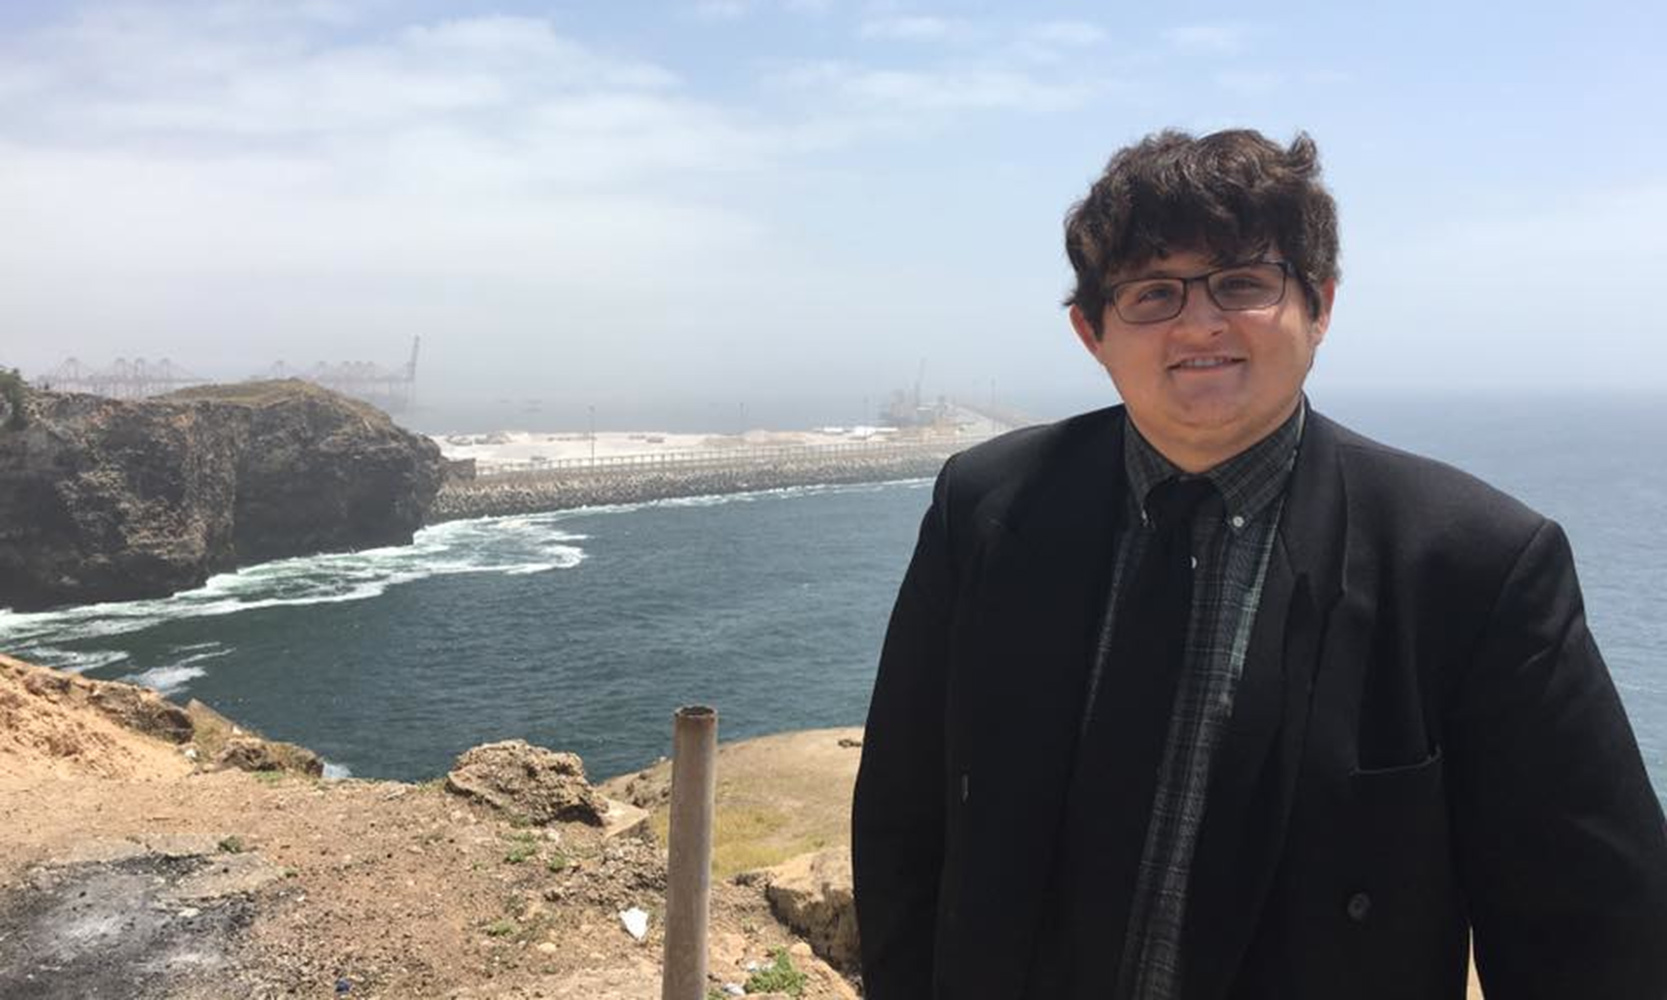 Christian Ledford is a young white man with brown hair hanging over his forehead and rectangular glasses. He stands in front of a sea in Oman wearing a dark green plaid button up with a black tie and black suit jacket.